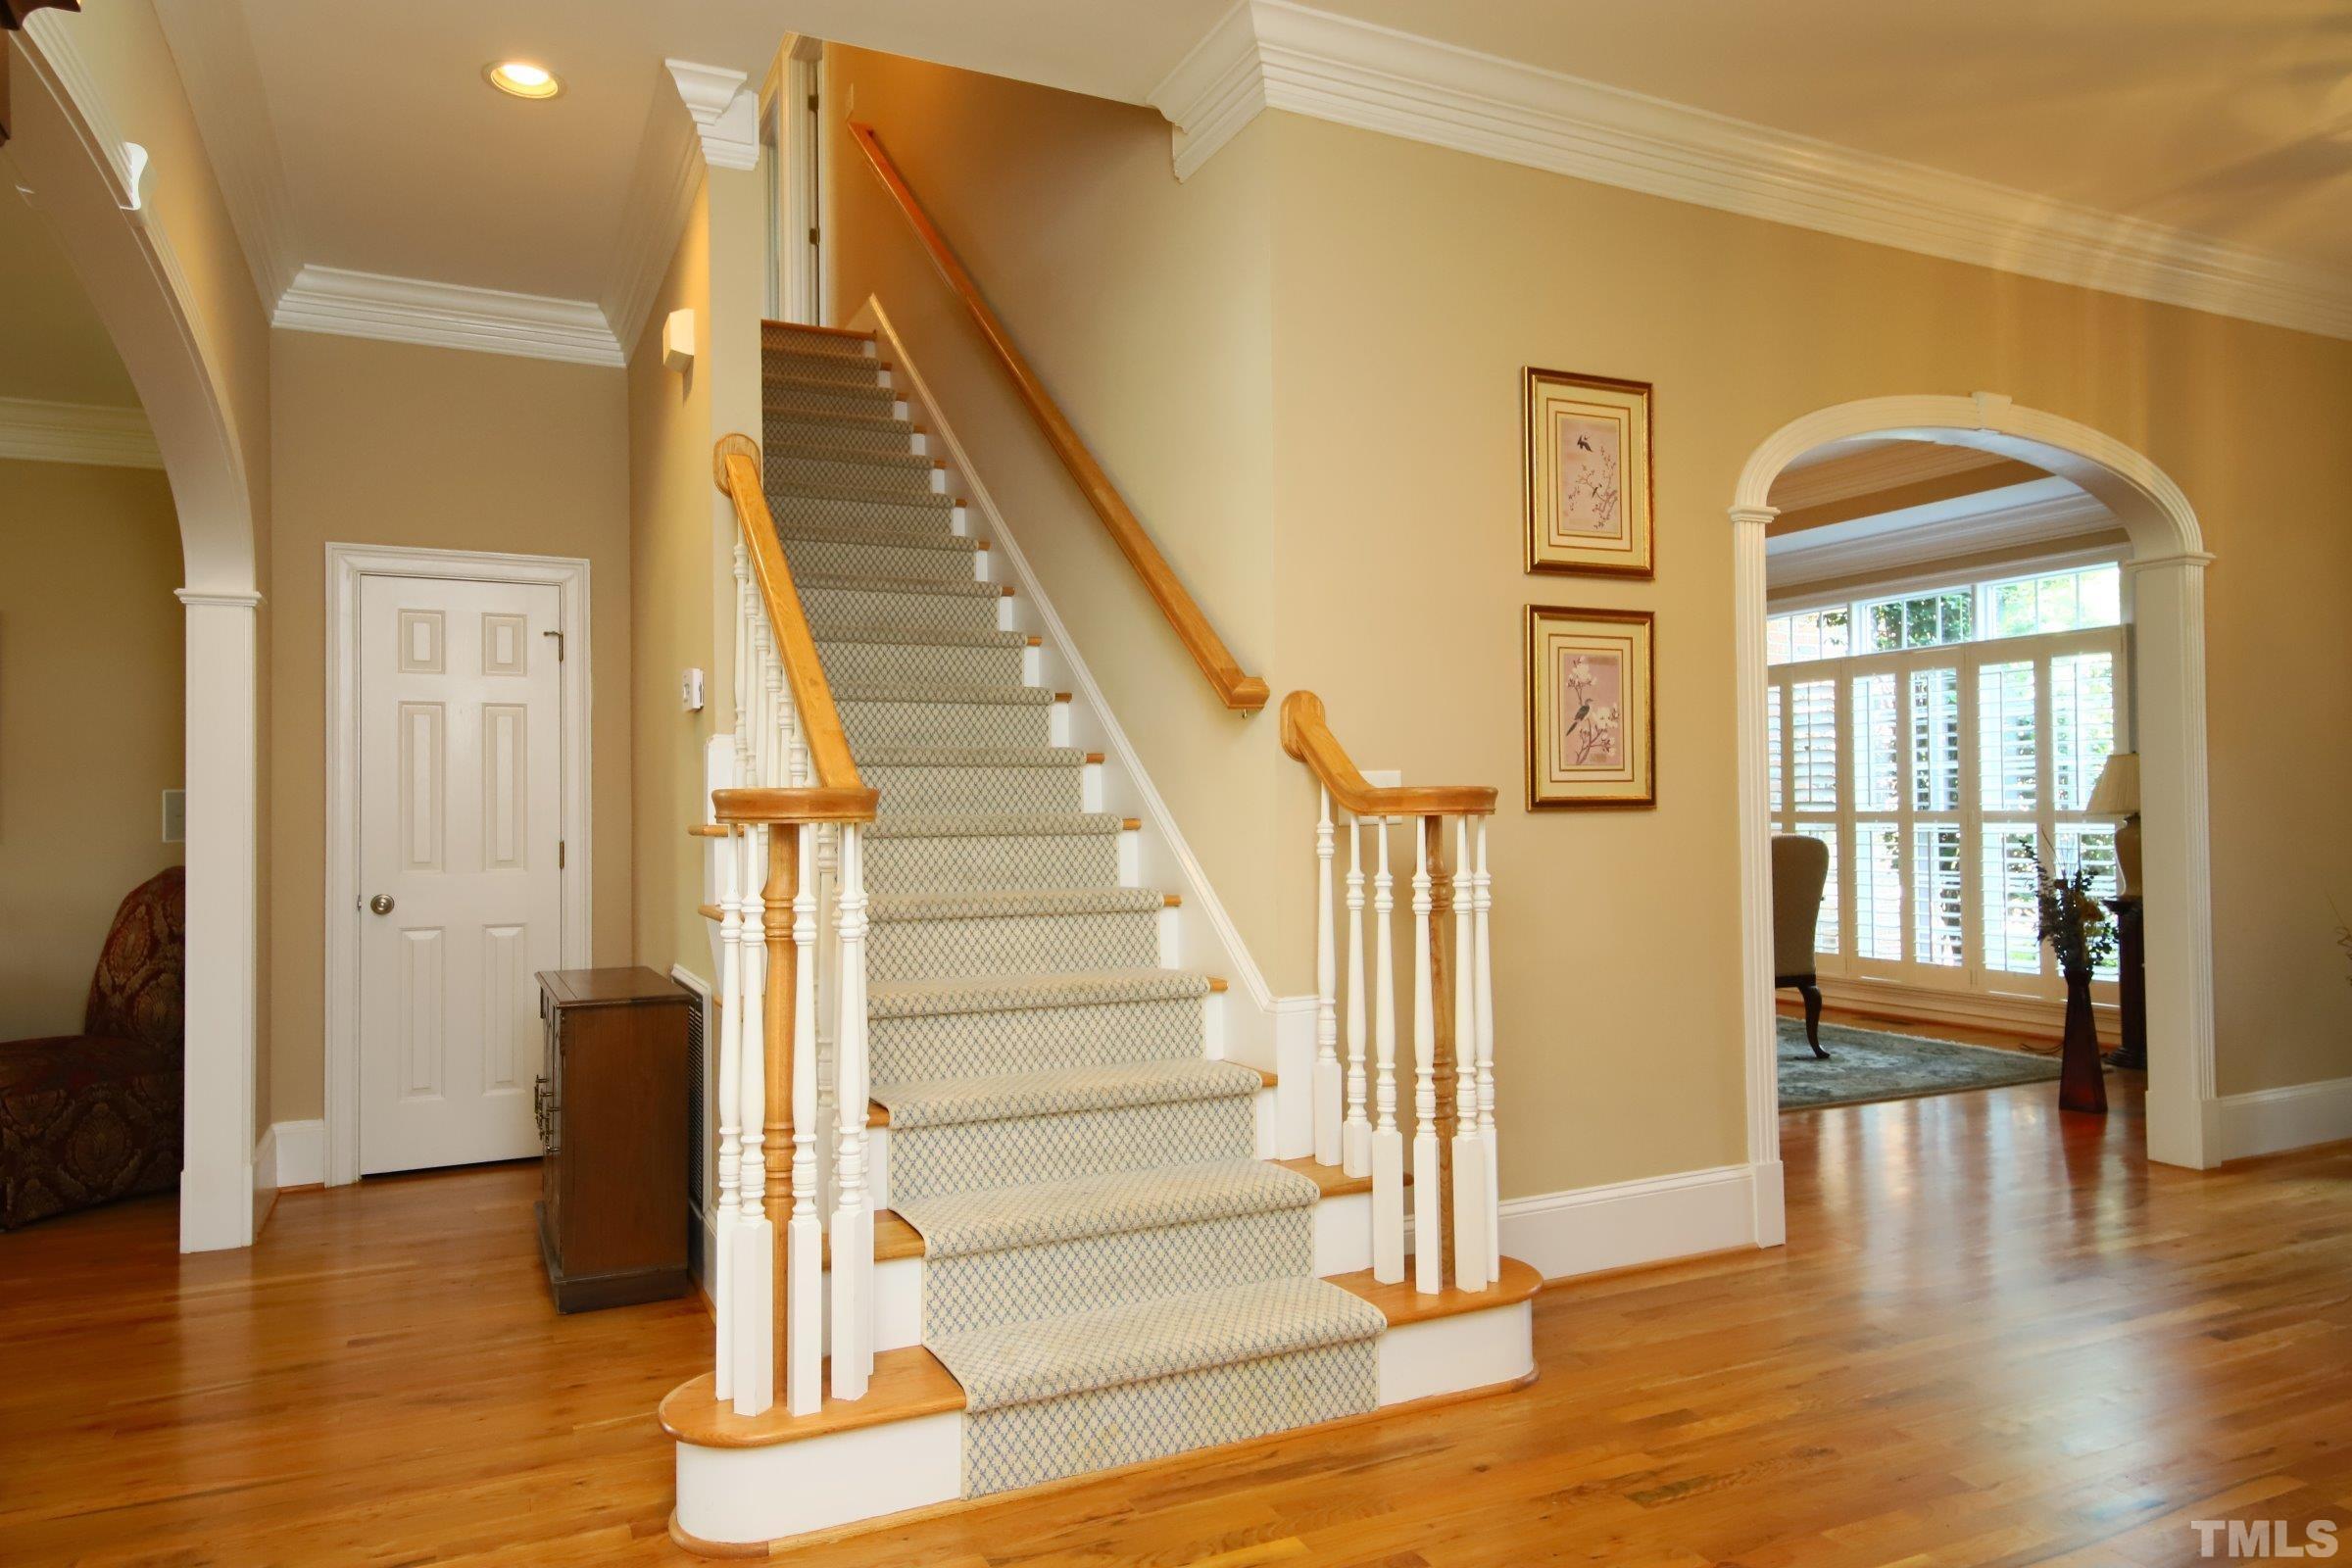 Gracious stairs lead to second level of volumes of space for living, sleeping, exercising......whatever is needed at this grand estate.